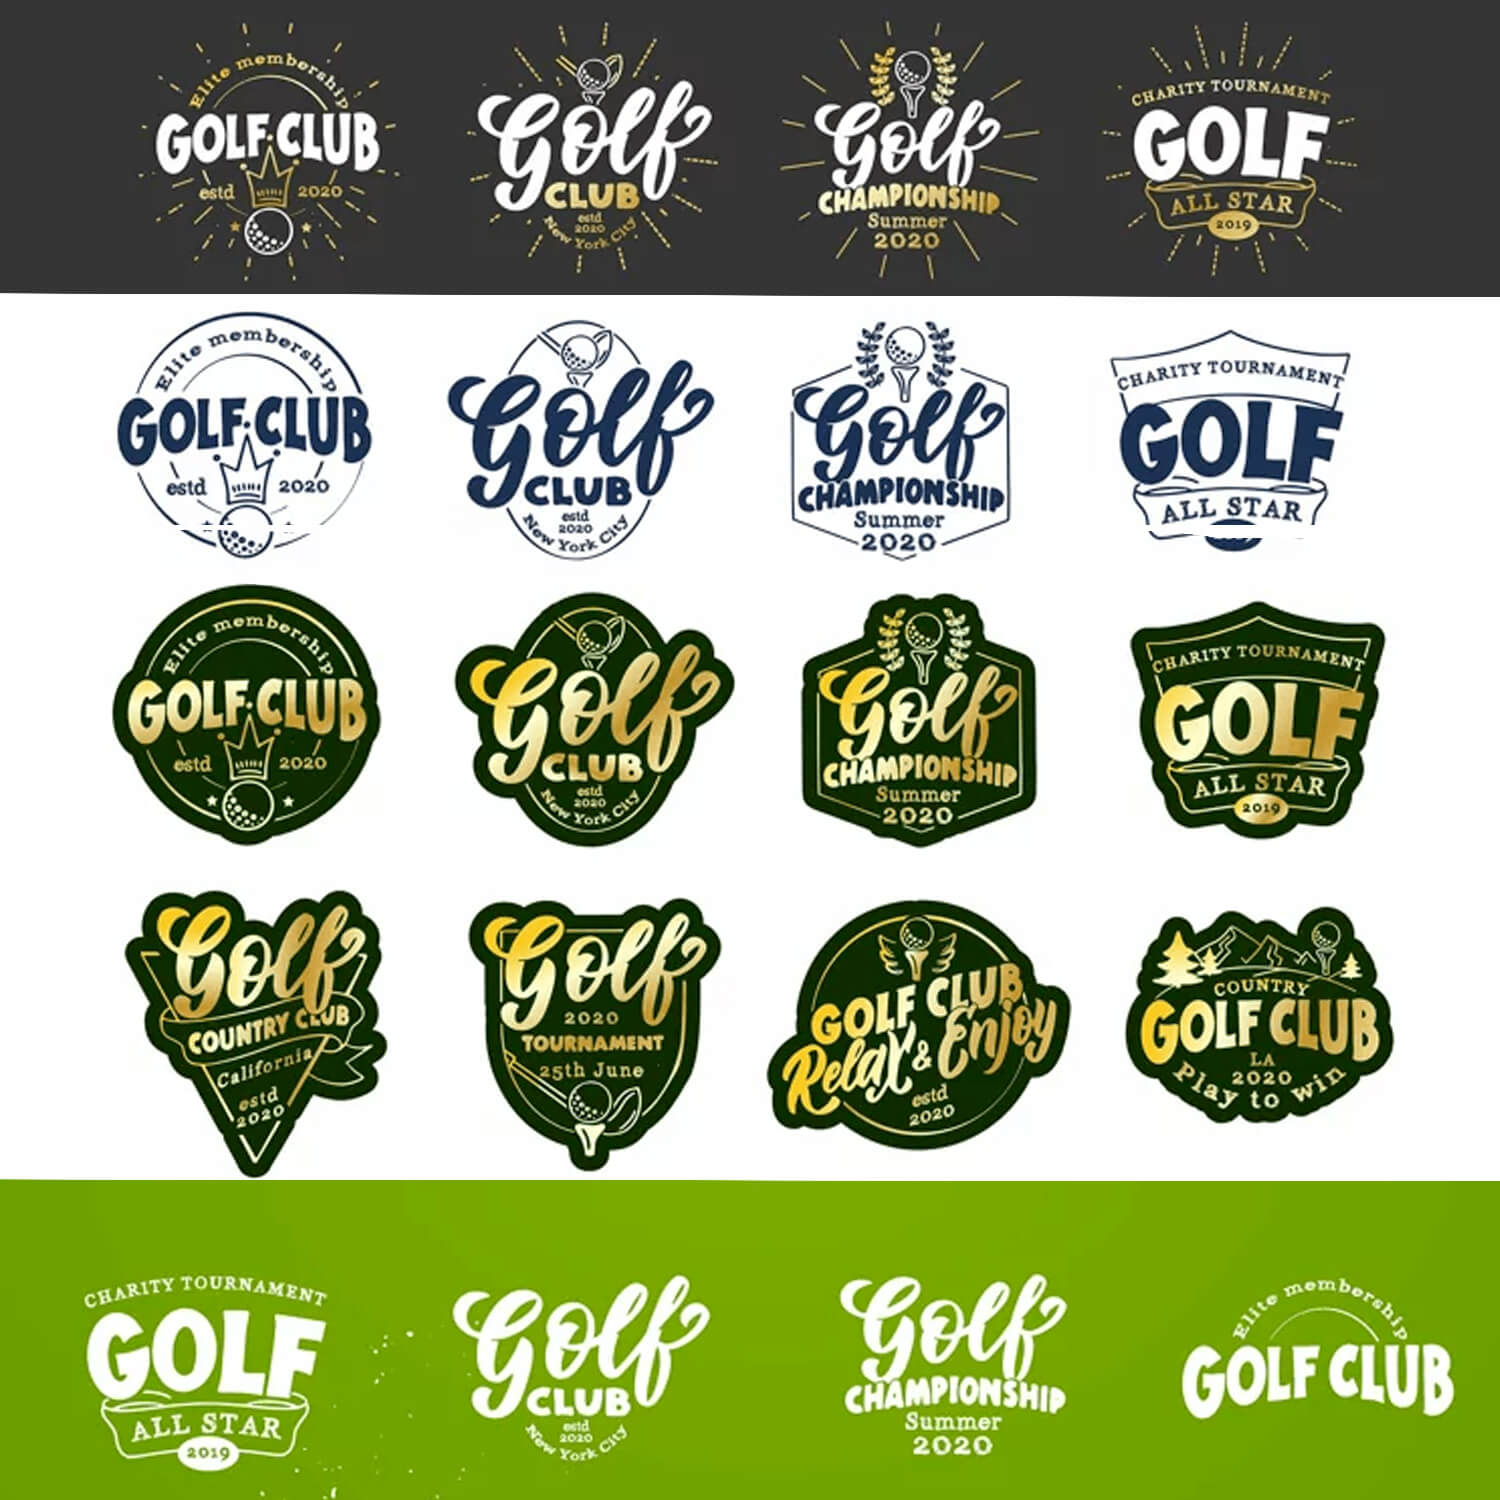 Golf championship with gold lettering and green background.